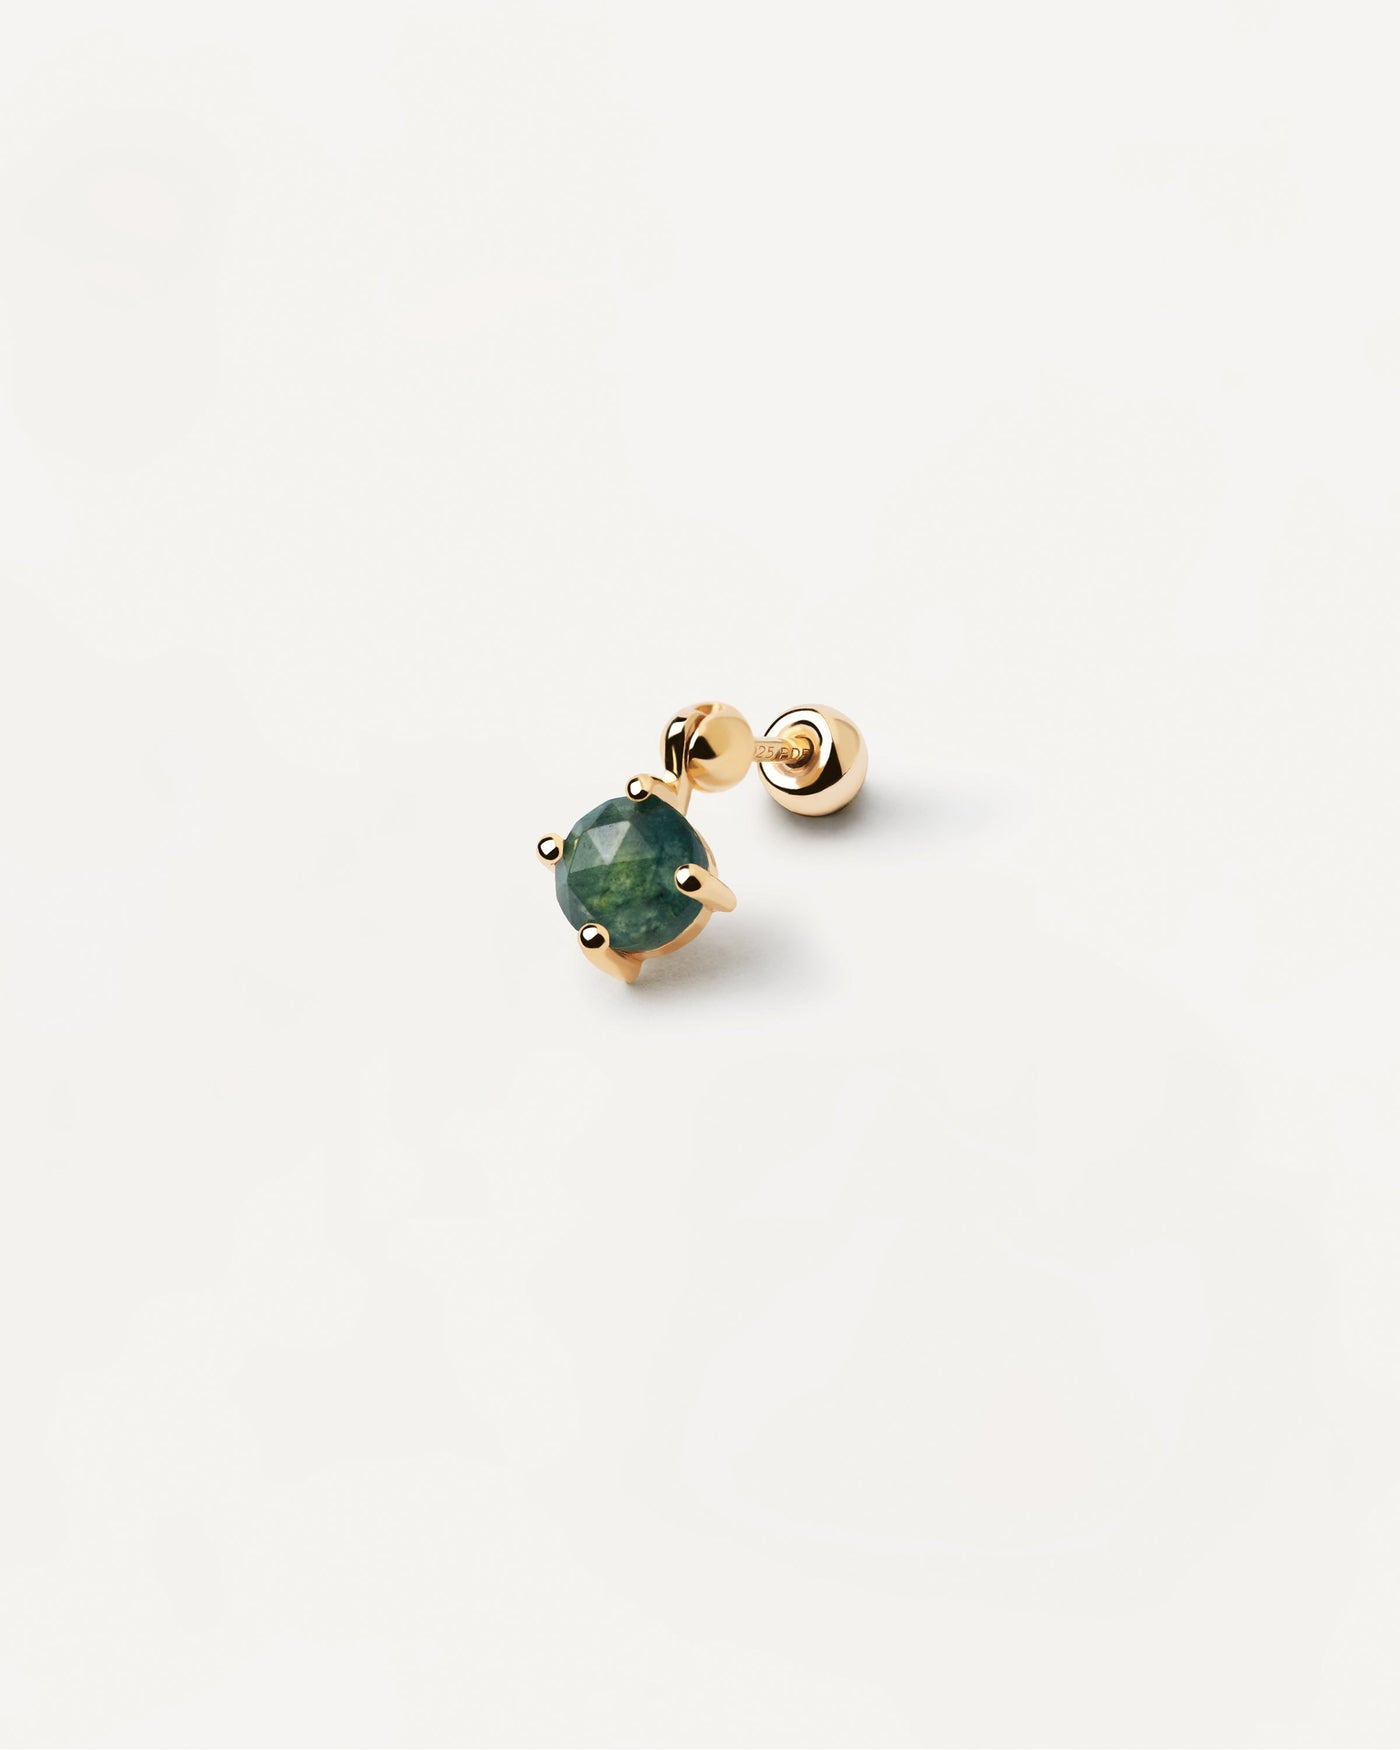 2023 Selection | Kimi Moss Agate Single Earring. Gold-plated ear piercing with dark green gemstone pendant in round cut. Get the latest arrival from PDPAOLA. Place your order safely and get this Best Seller. Free Shipping.